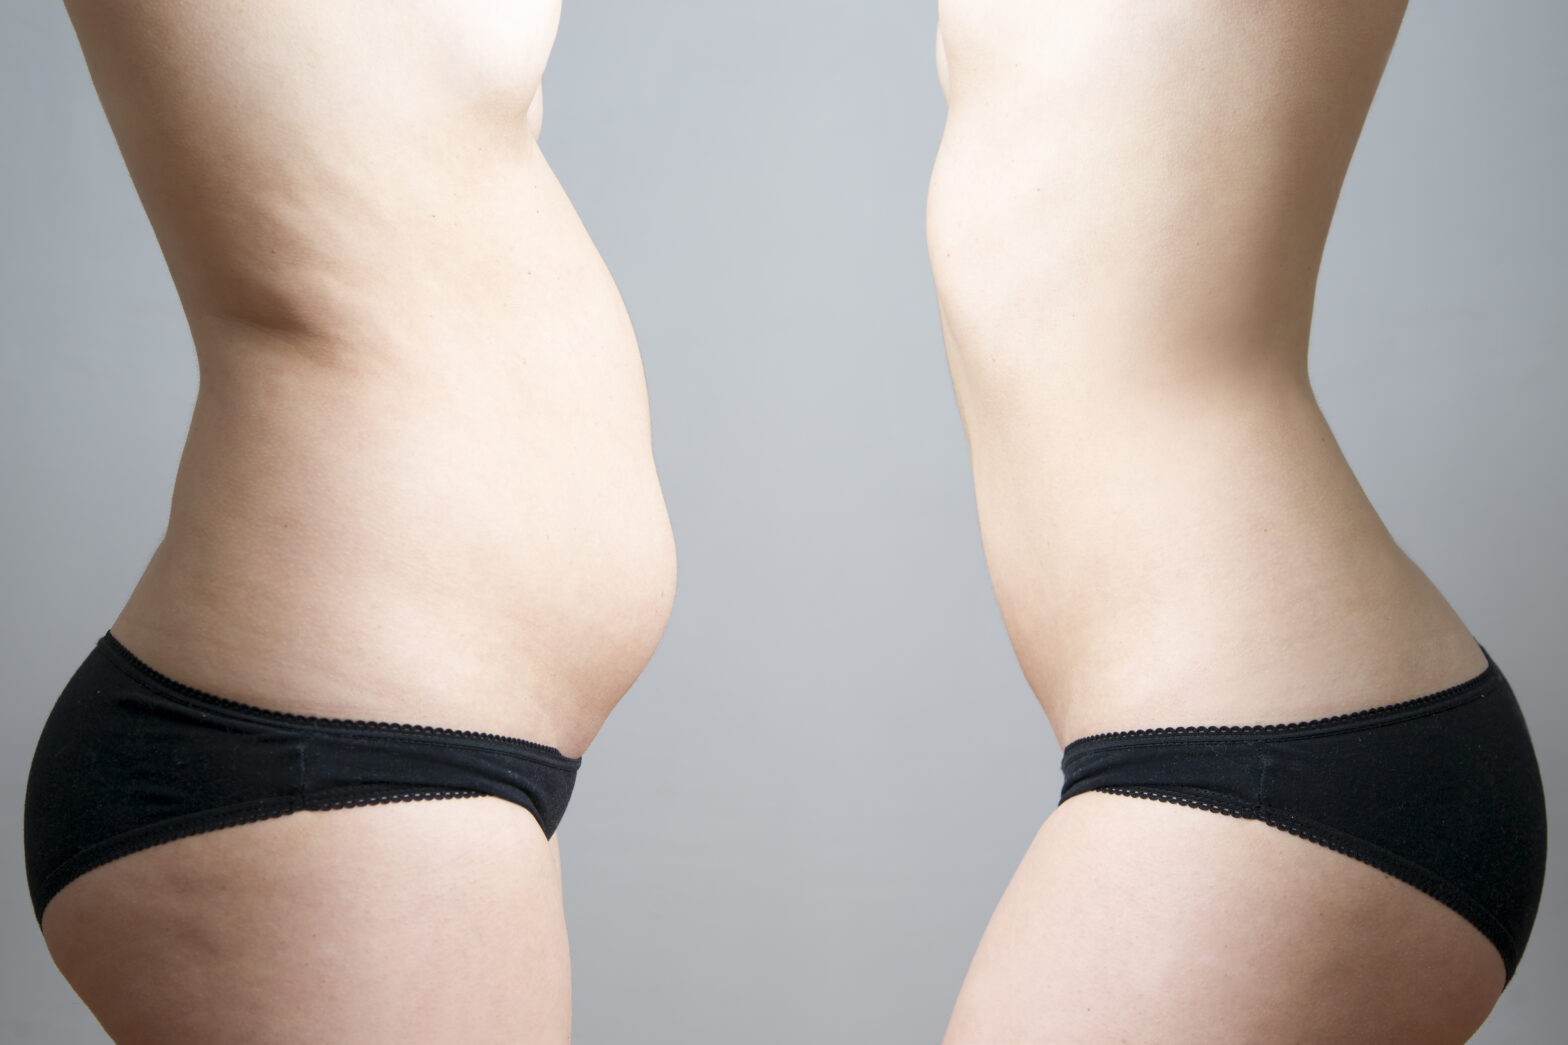 Featured image for post: What to Expect Before and After Liposuction Surgery